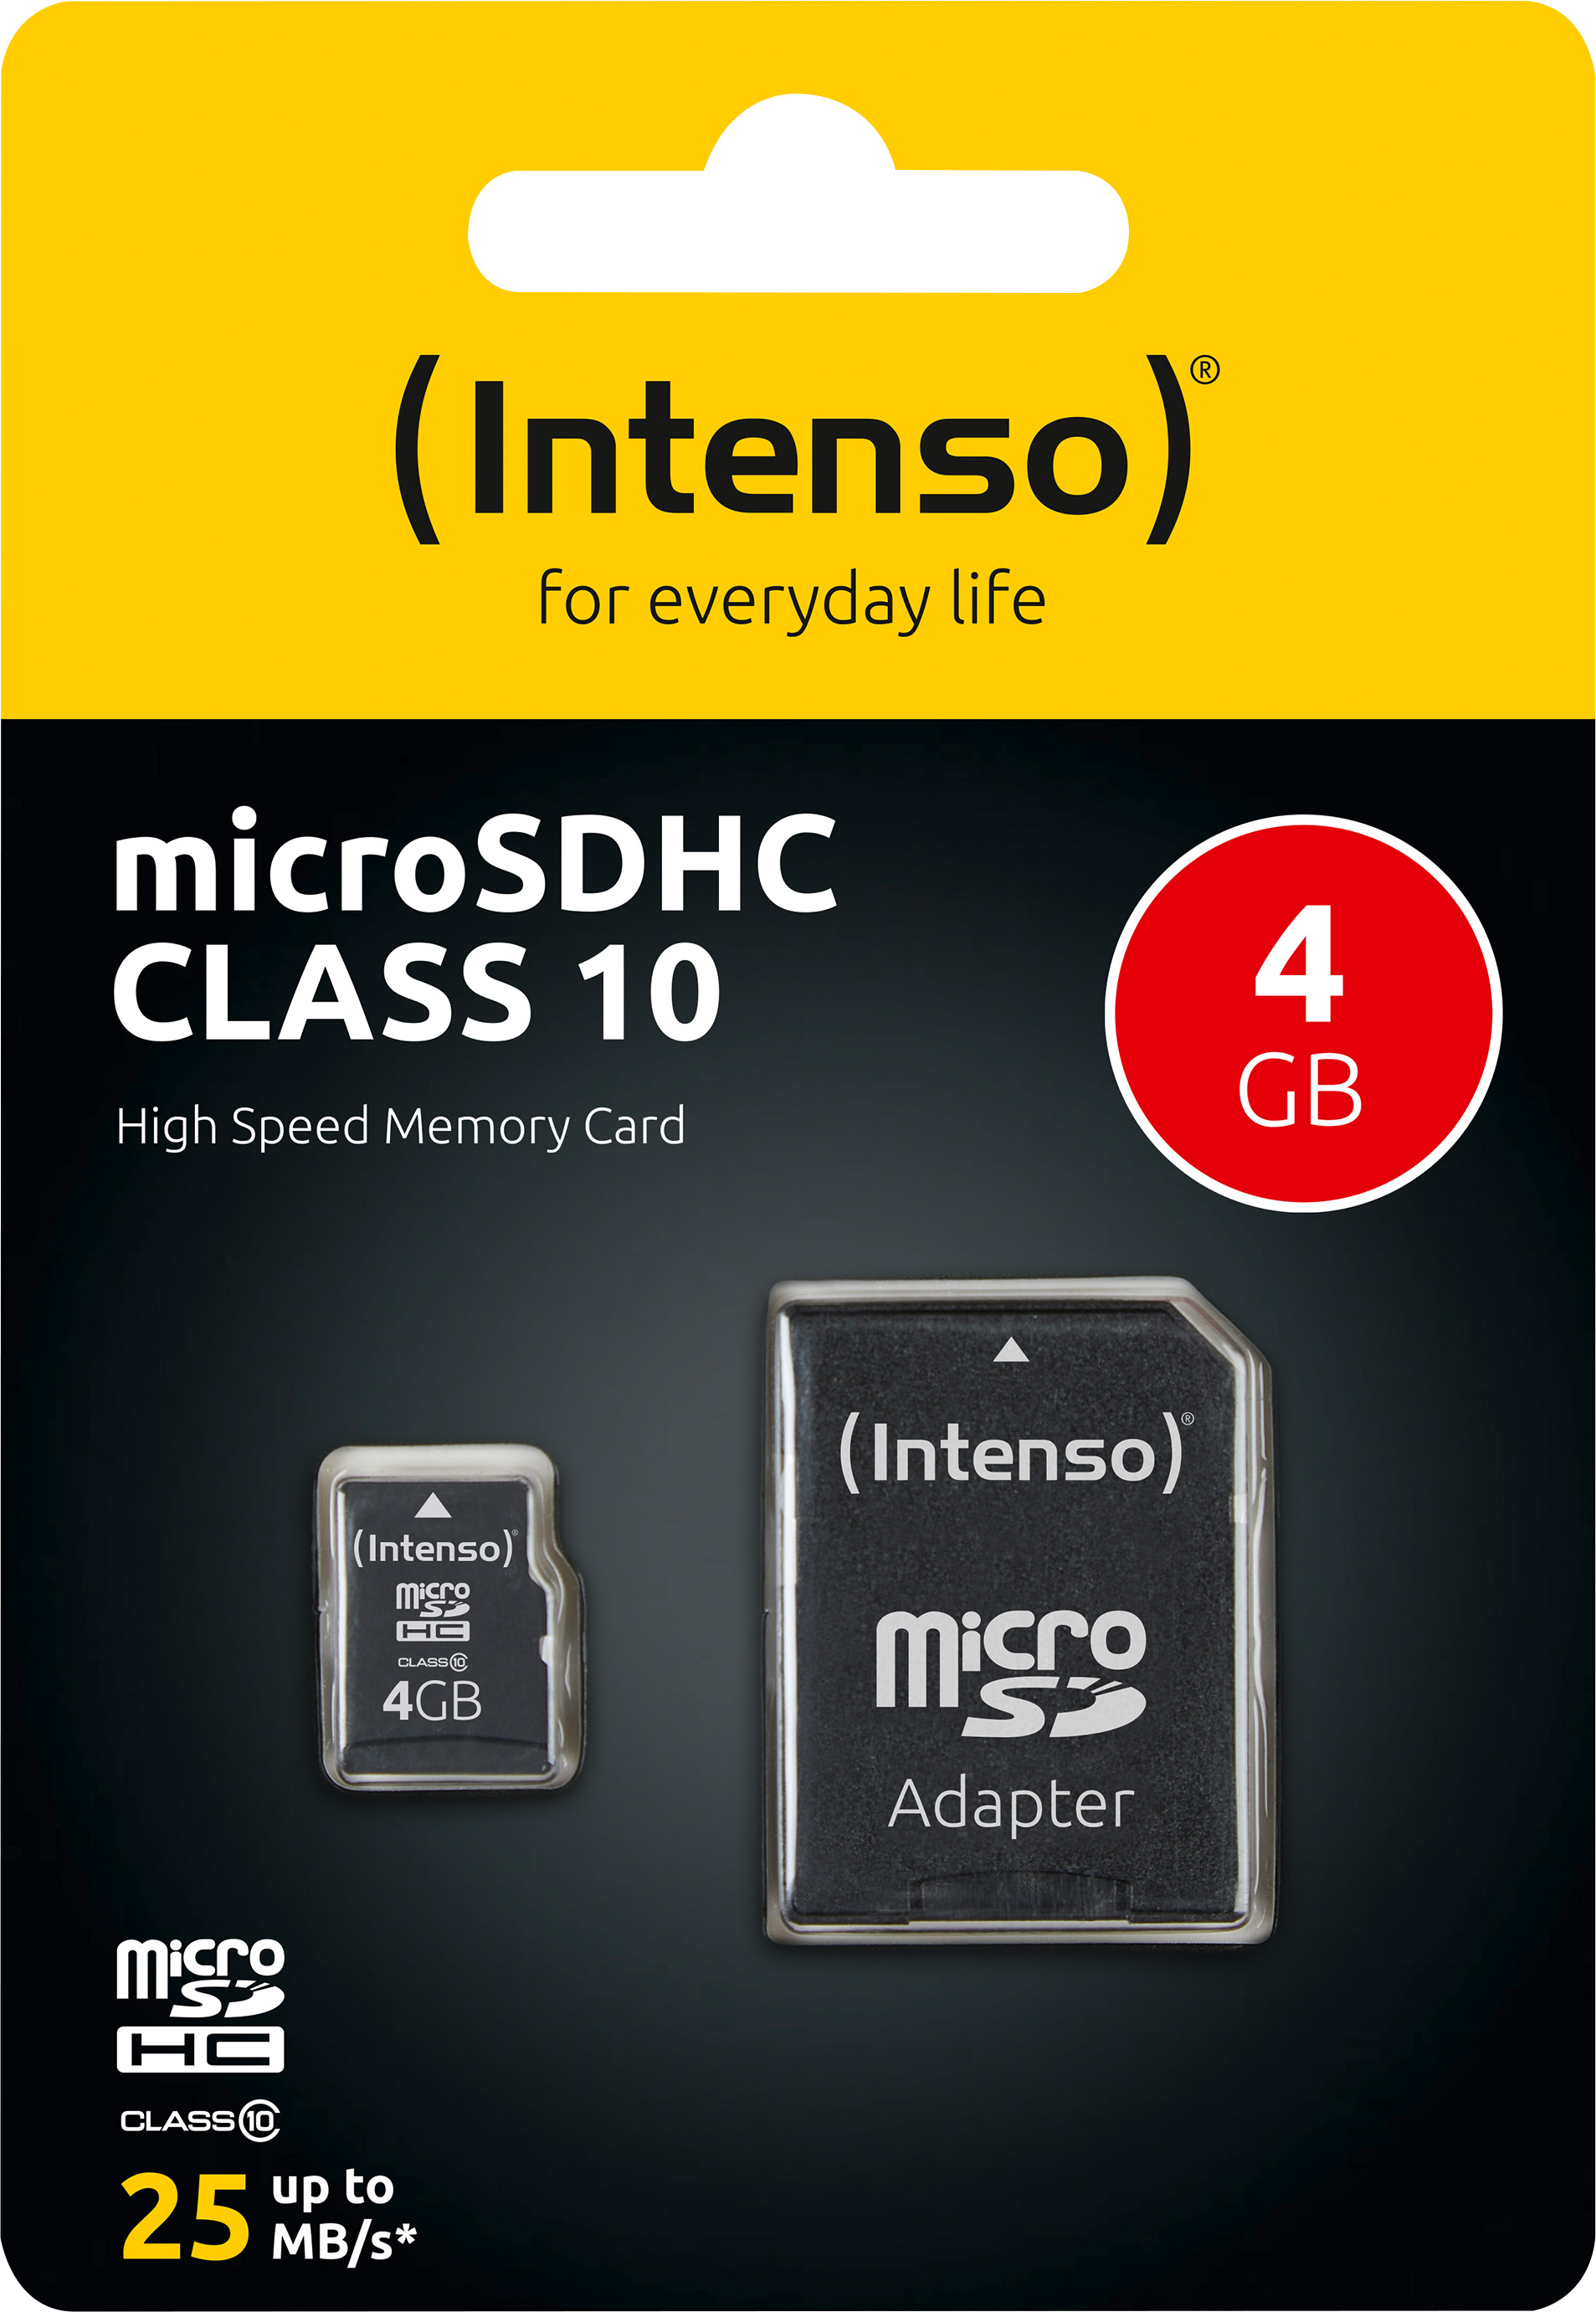 Intenso microSDHC Card 4GB, Class 10 (R) 25MB/s, (W) 10MB/s, SD-Adapter, Retail-Blister